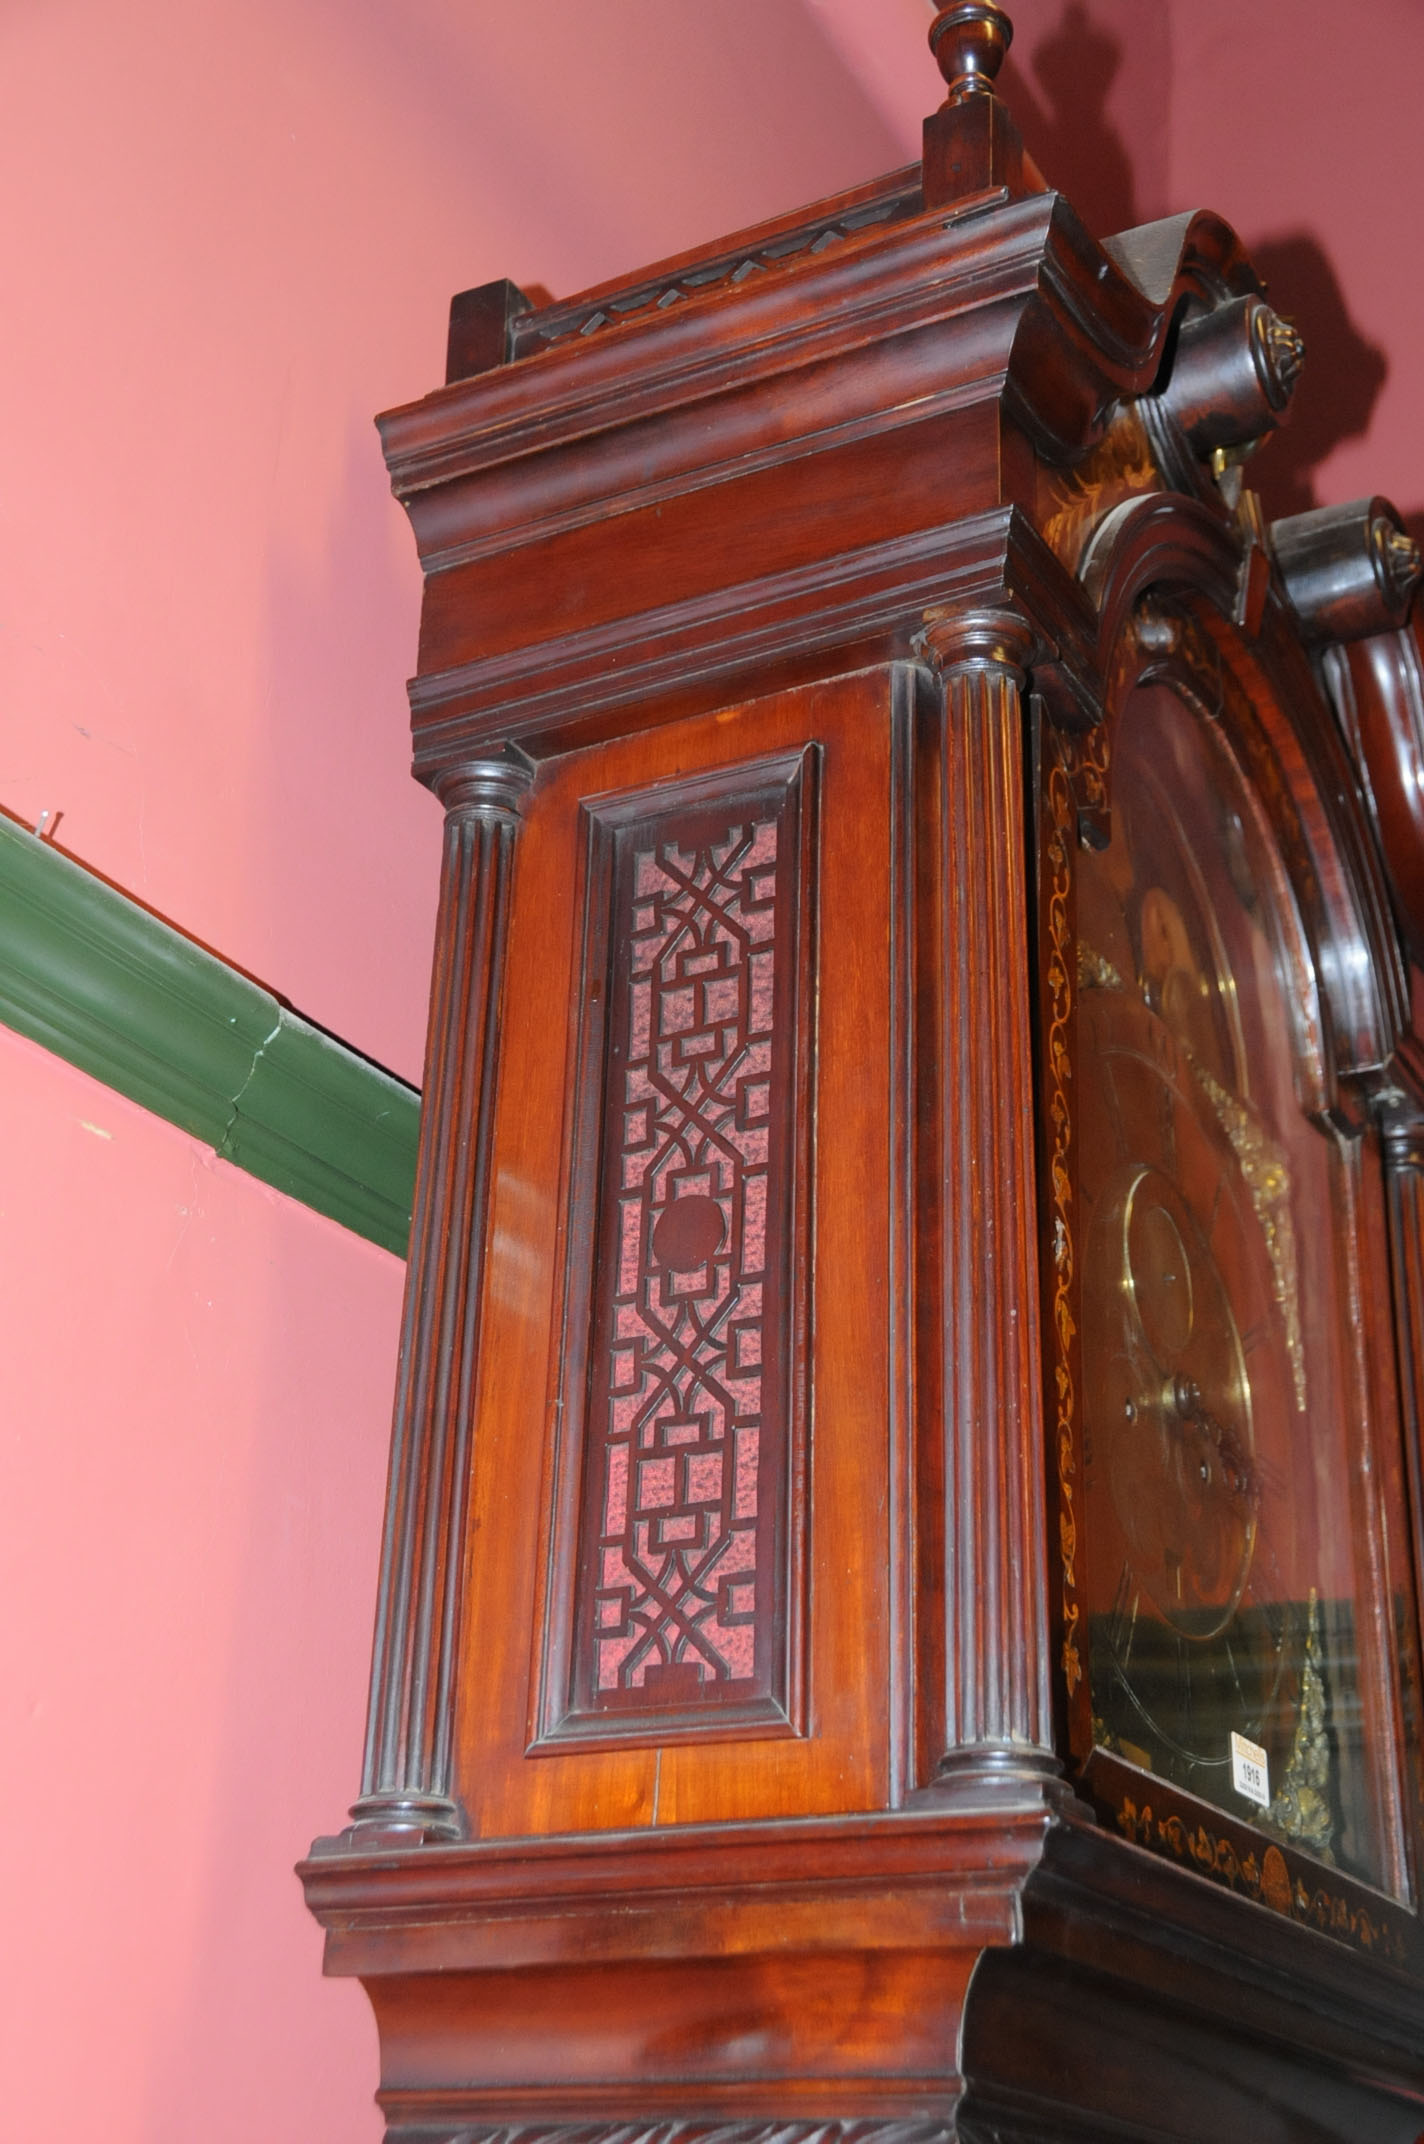 A George III mahogany longcase clock by John Wyke of Liverpool, with mahogany and marquetry case, - Image 12 of 14